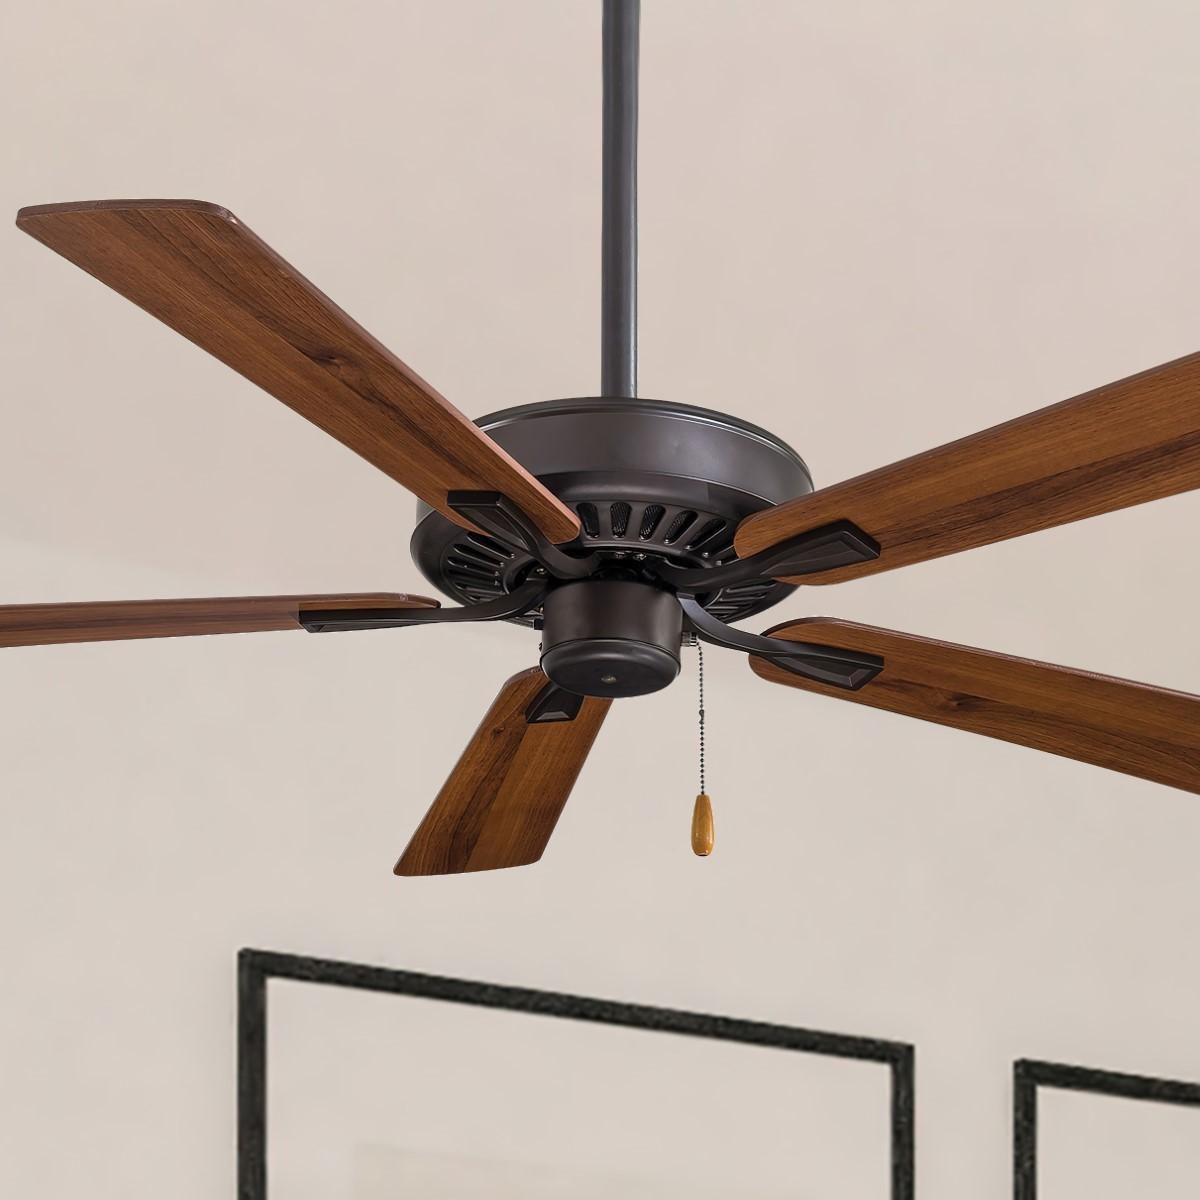 Contractor Plus 52 Inch Ceiling Fan - Bees Lighting